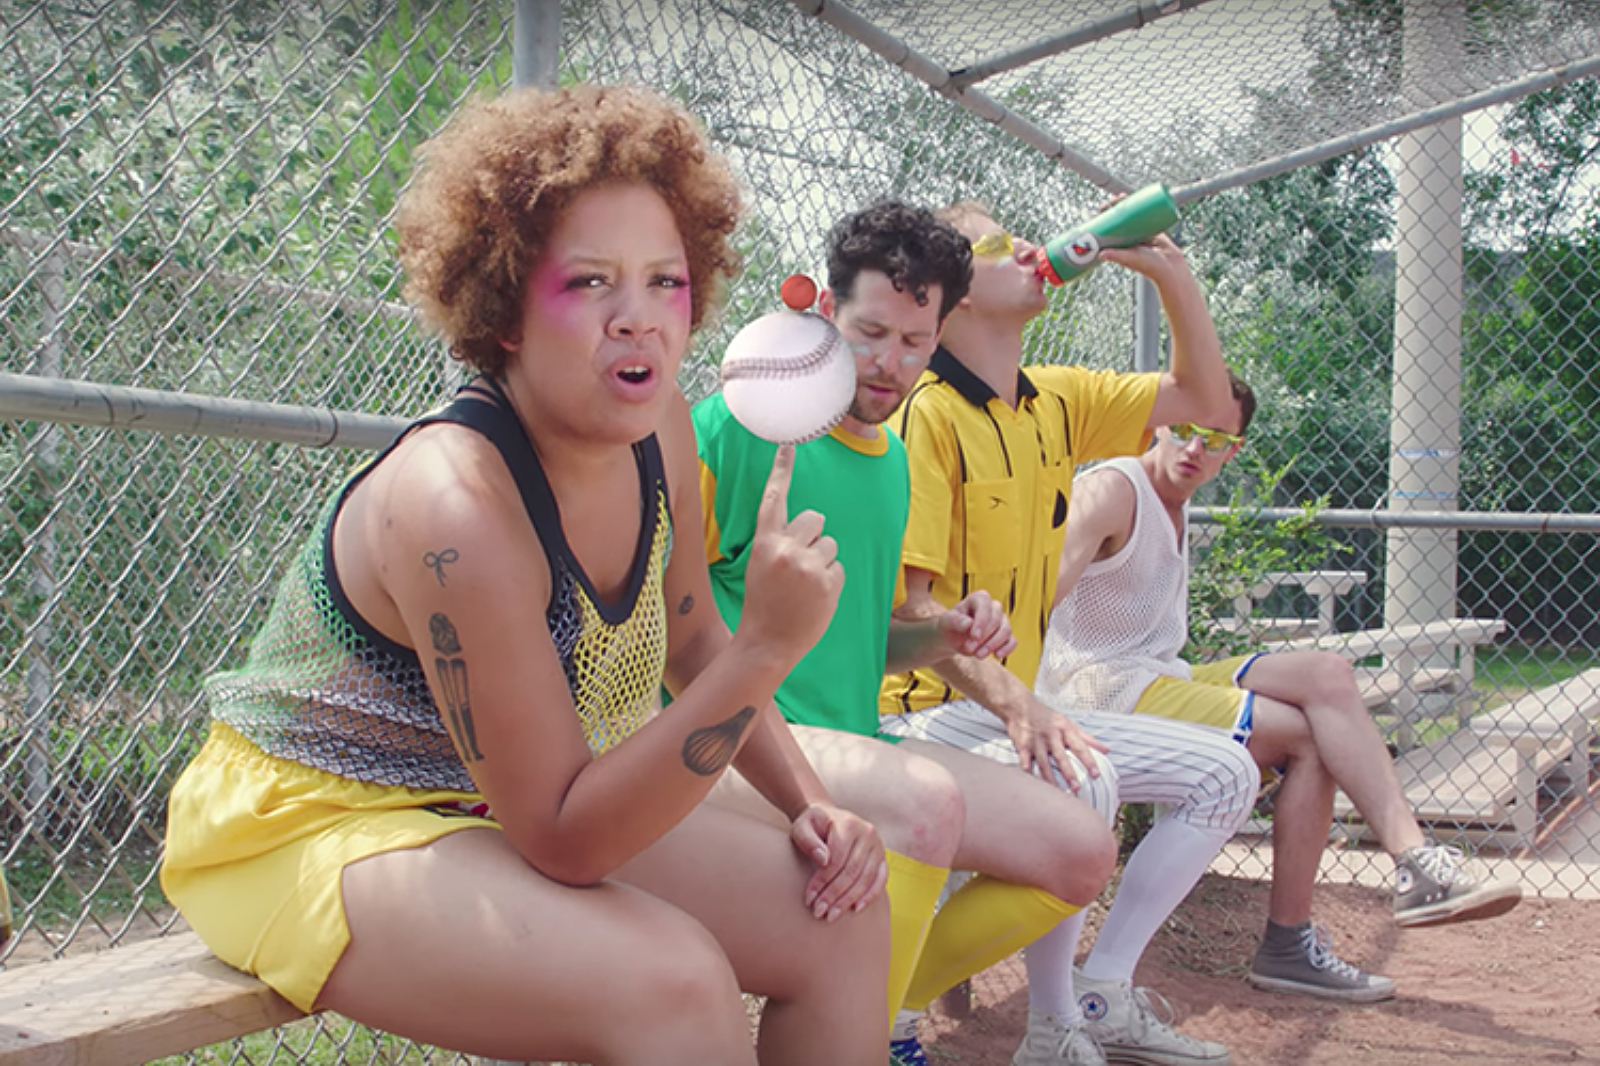 Weaves get sporty in their 'Slicked' video